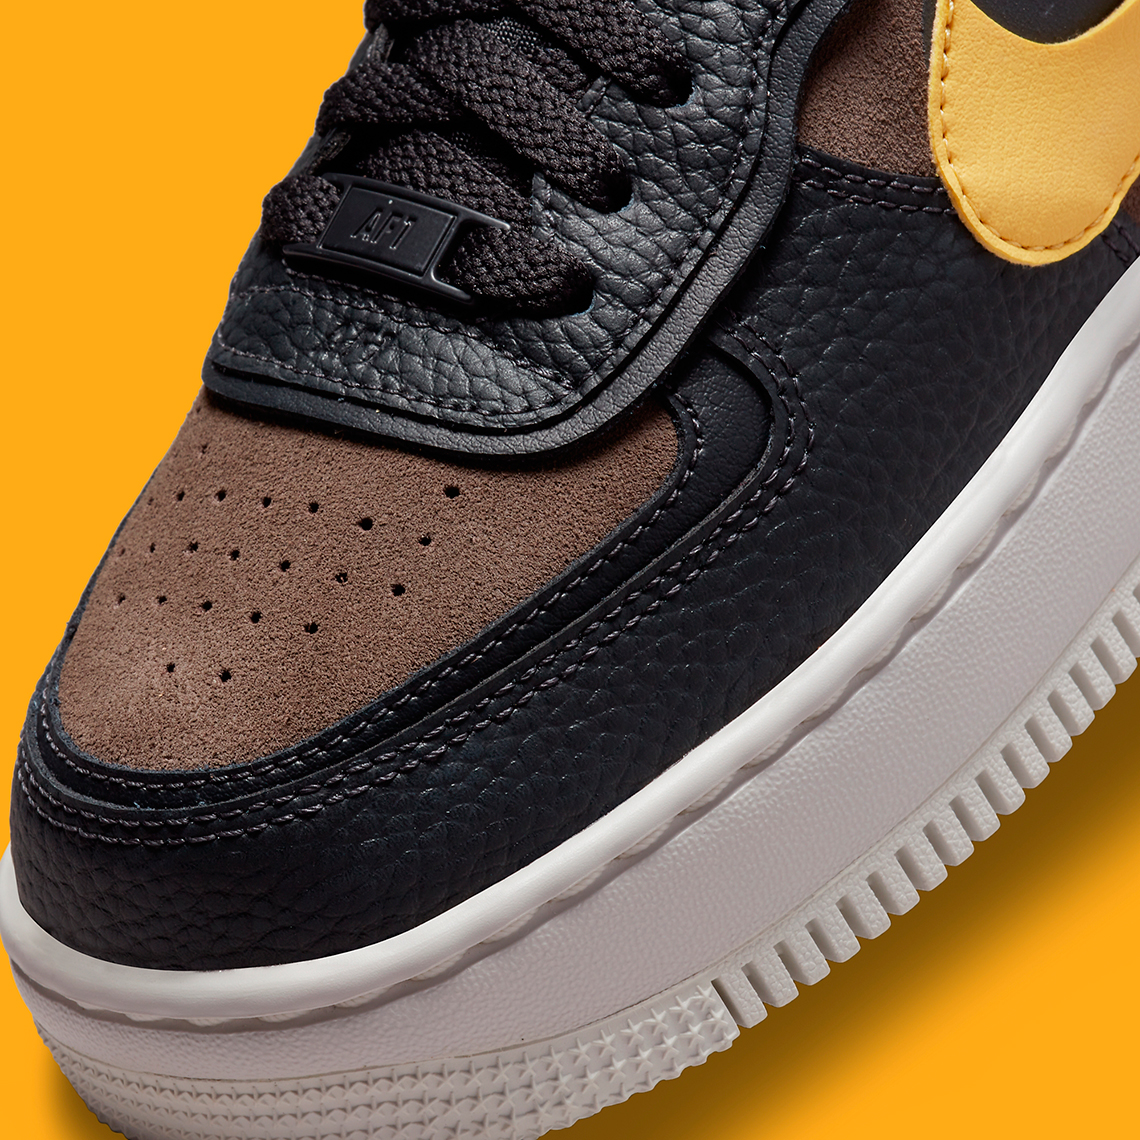 Nike Air Force 1 Shadow Dq0881 001 Release Date 7